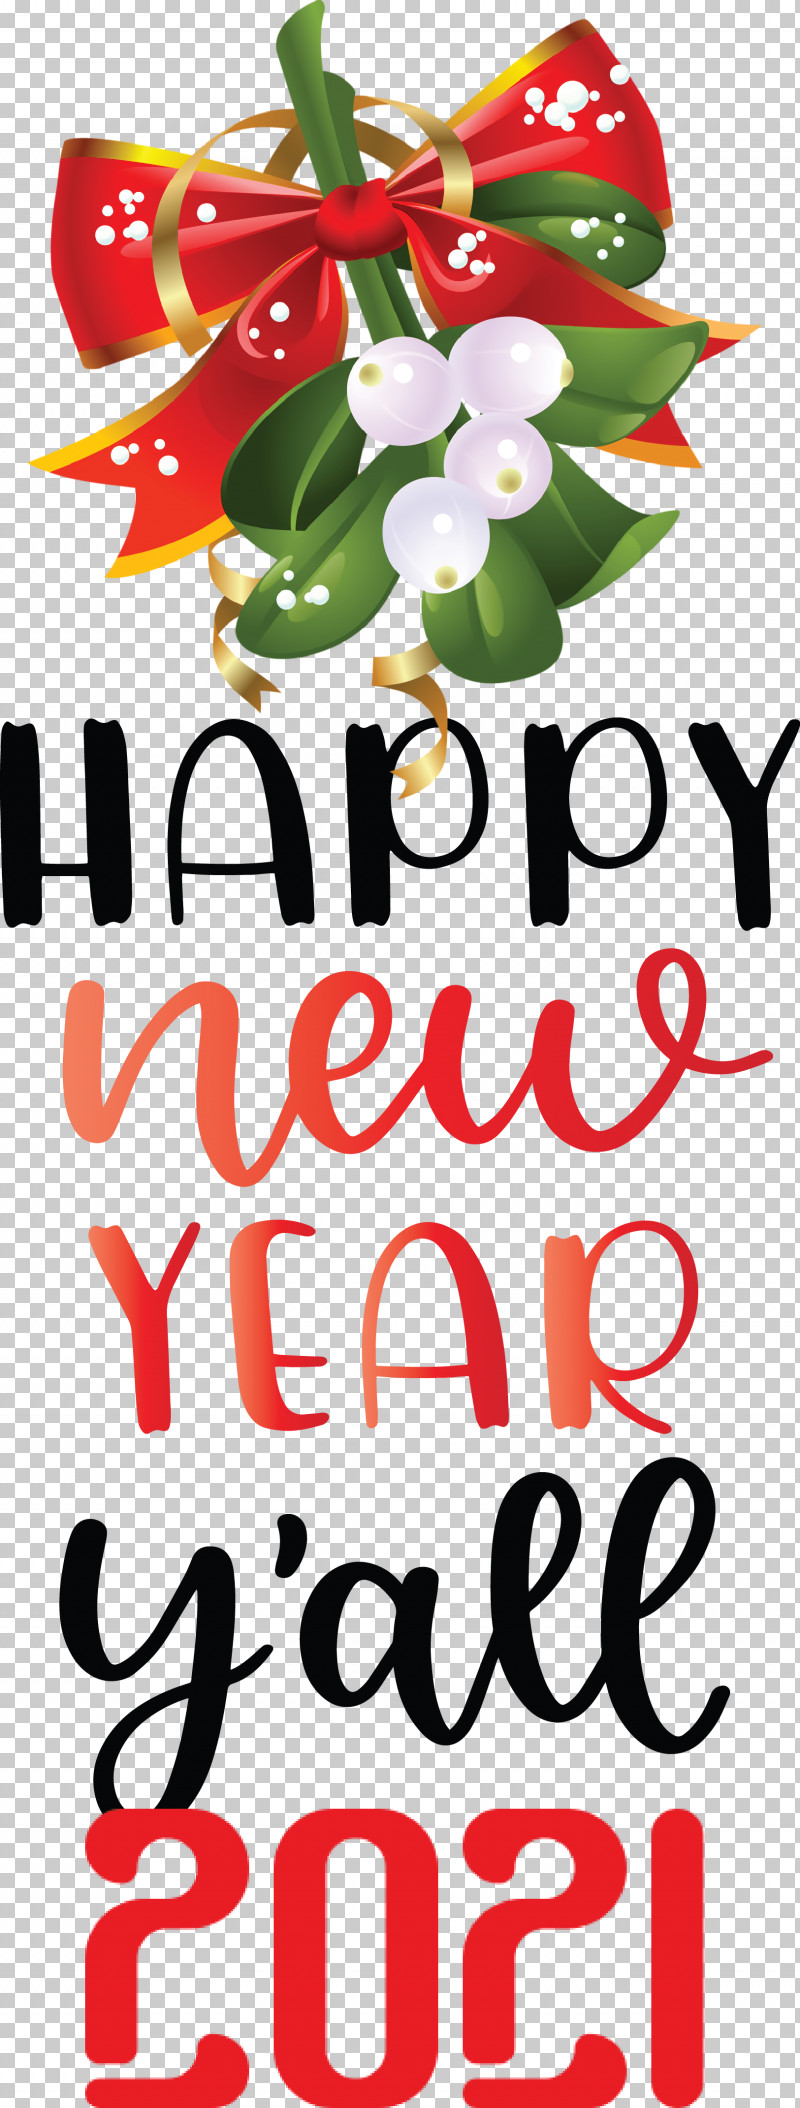 2021 Happy New Year 2021 New Year 2021 Wishes PNG, Clipart, 2021 Happy New Year, 2021 New Year, 2021 Wishes, Christmas Day, Floral Design Free PNG Download